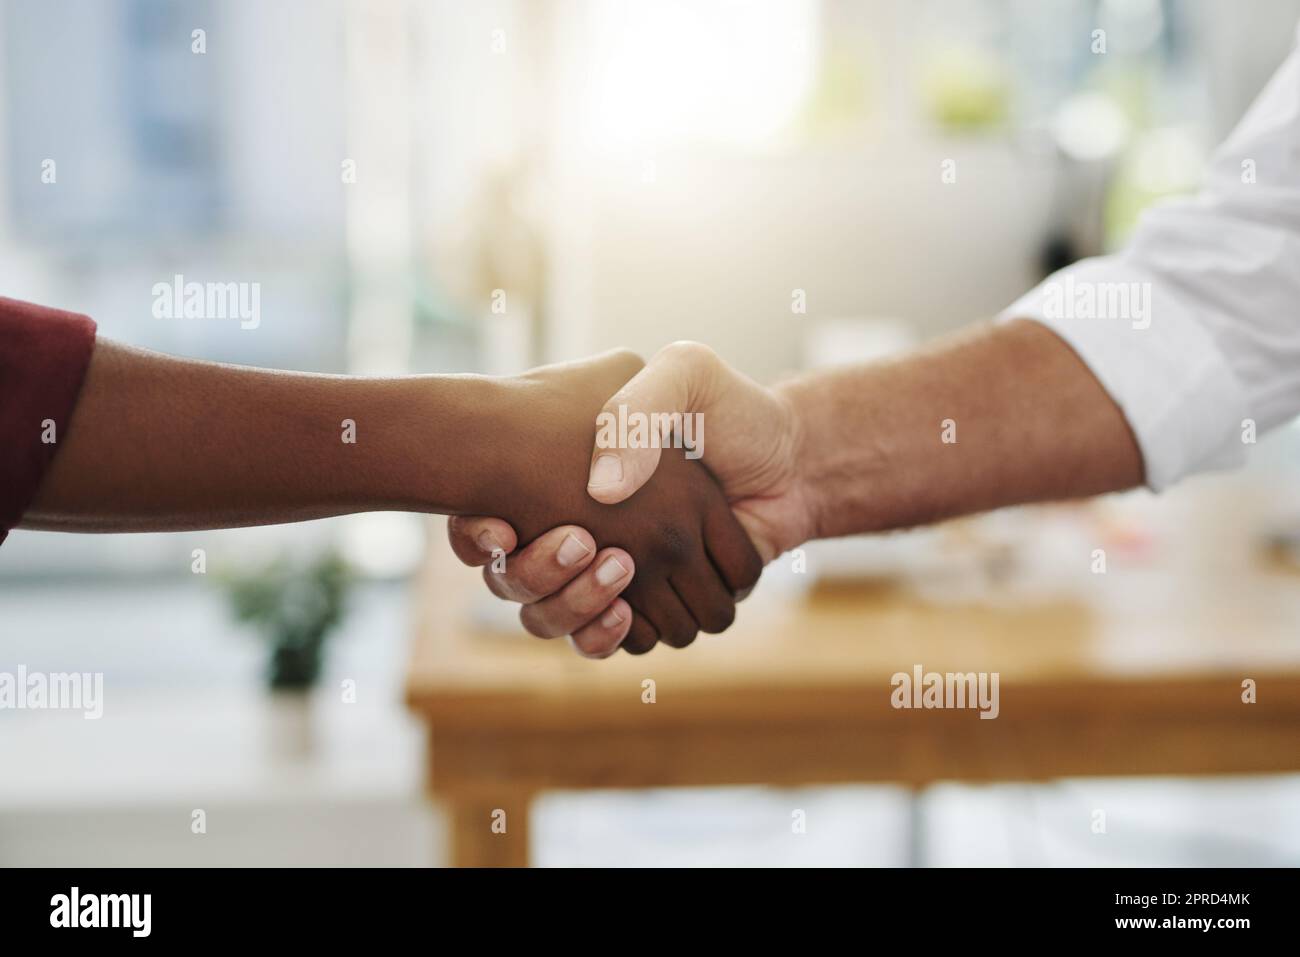 A team handshake in agreement between colleagues and coworkers in an office. Working together as a team to achieve success, merge as a partnership or promote a business person at work closeup. Stock Photo